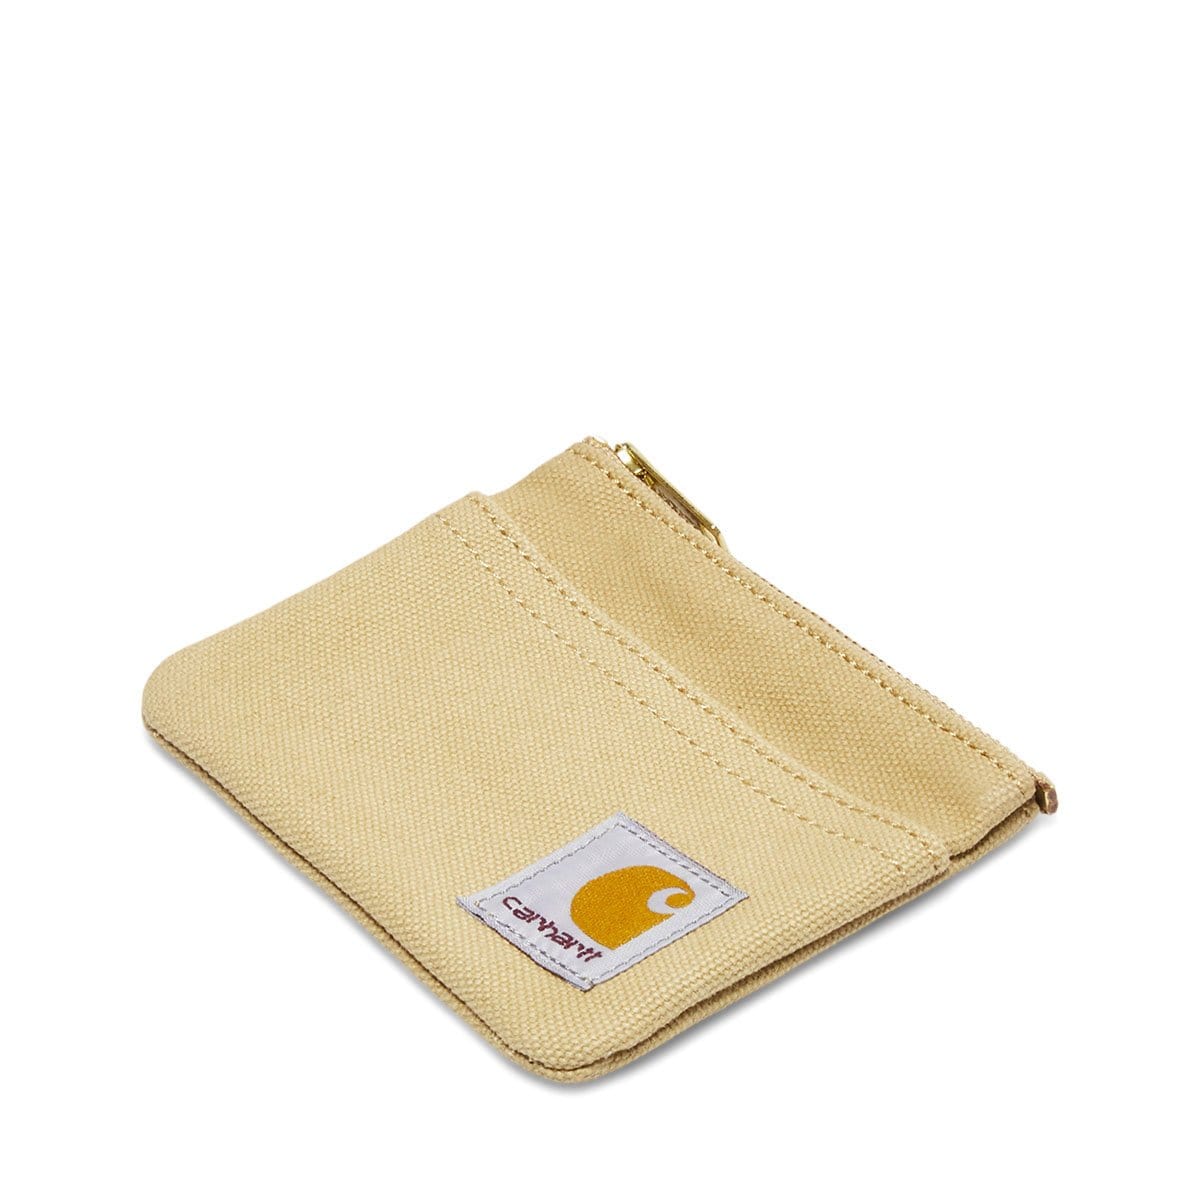 Carhartt W.I.P. Bags & Accessories DUSTY H BROWN/BLACK / OS CANVAS WALLET